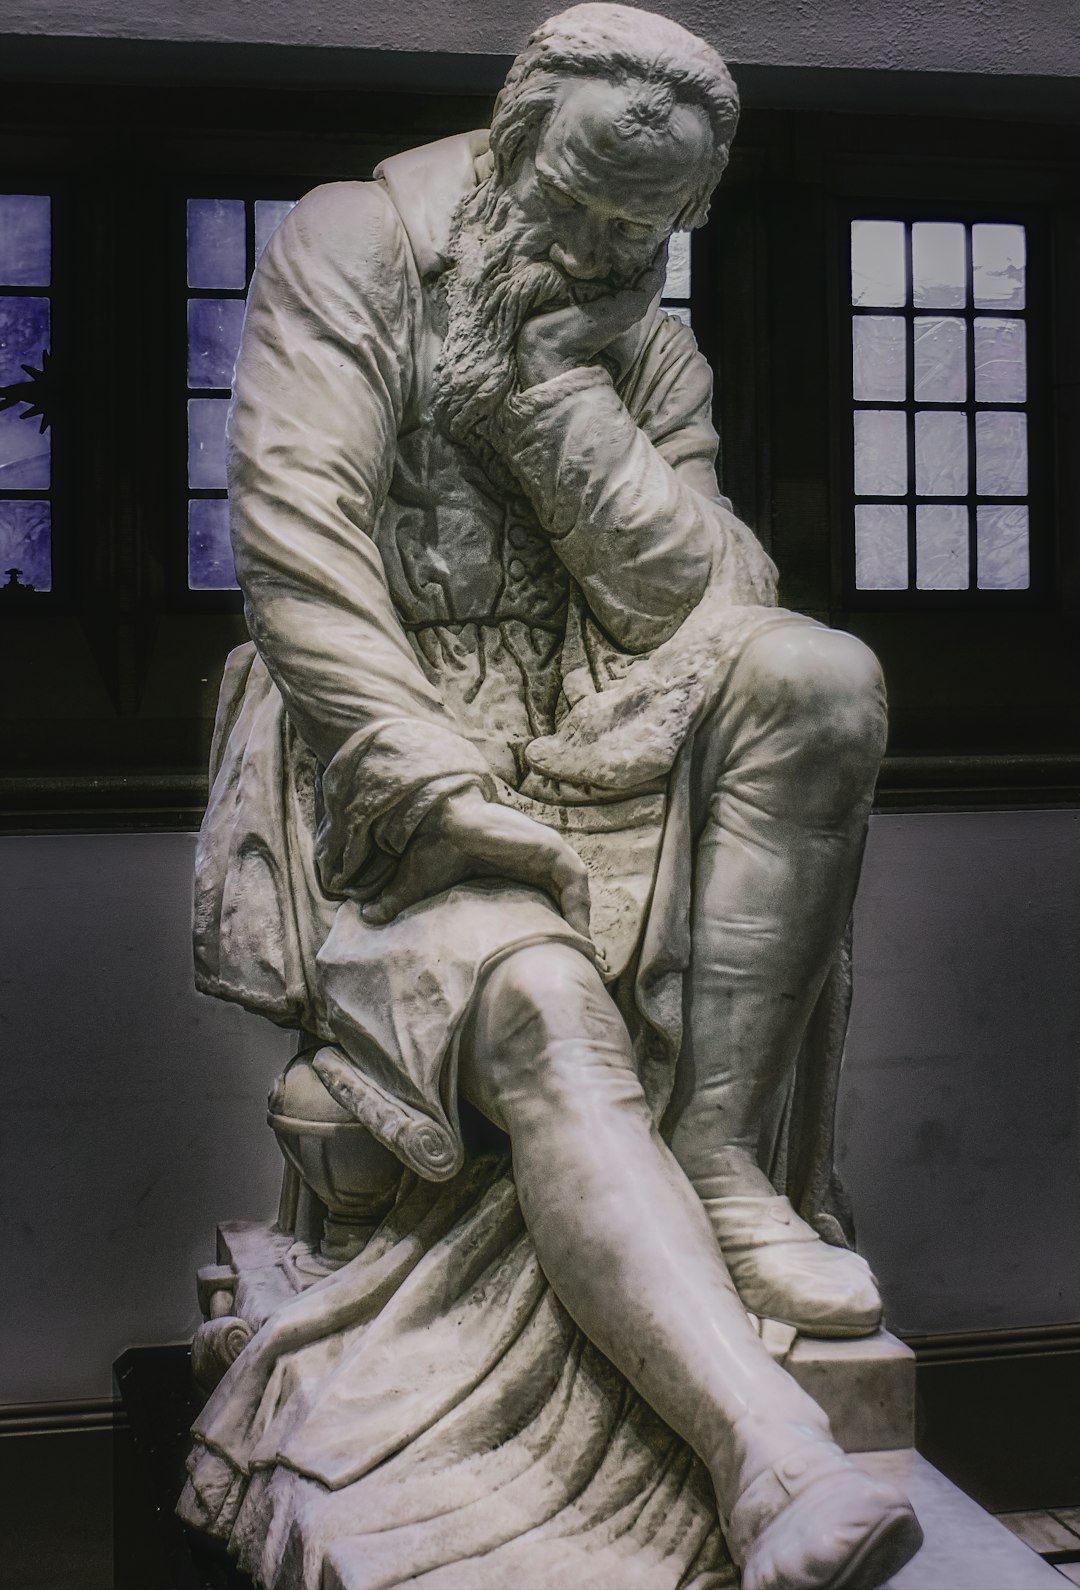 Marble sculpture of Galileo Galilei contemplating the nature of the universe Nov., 2019). 